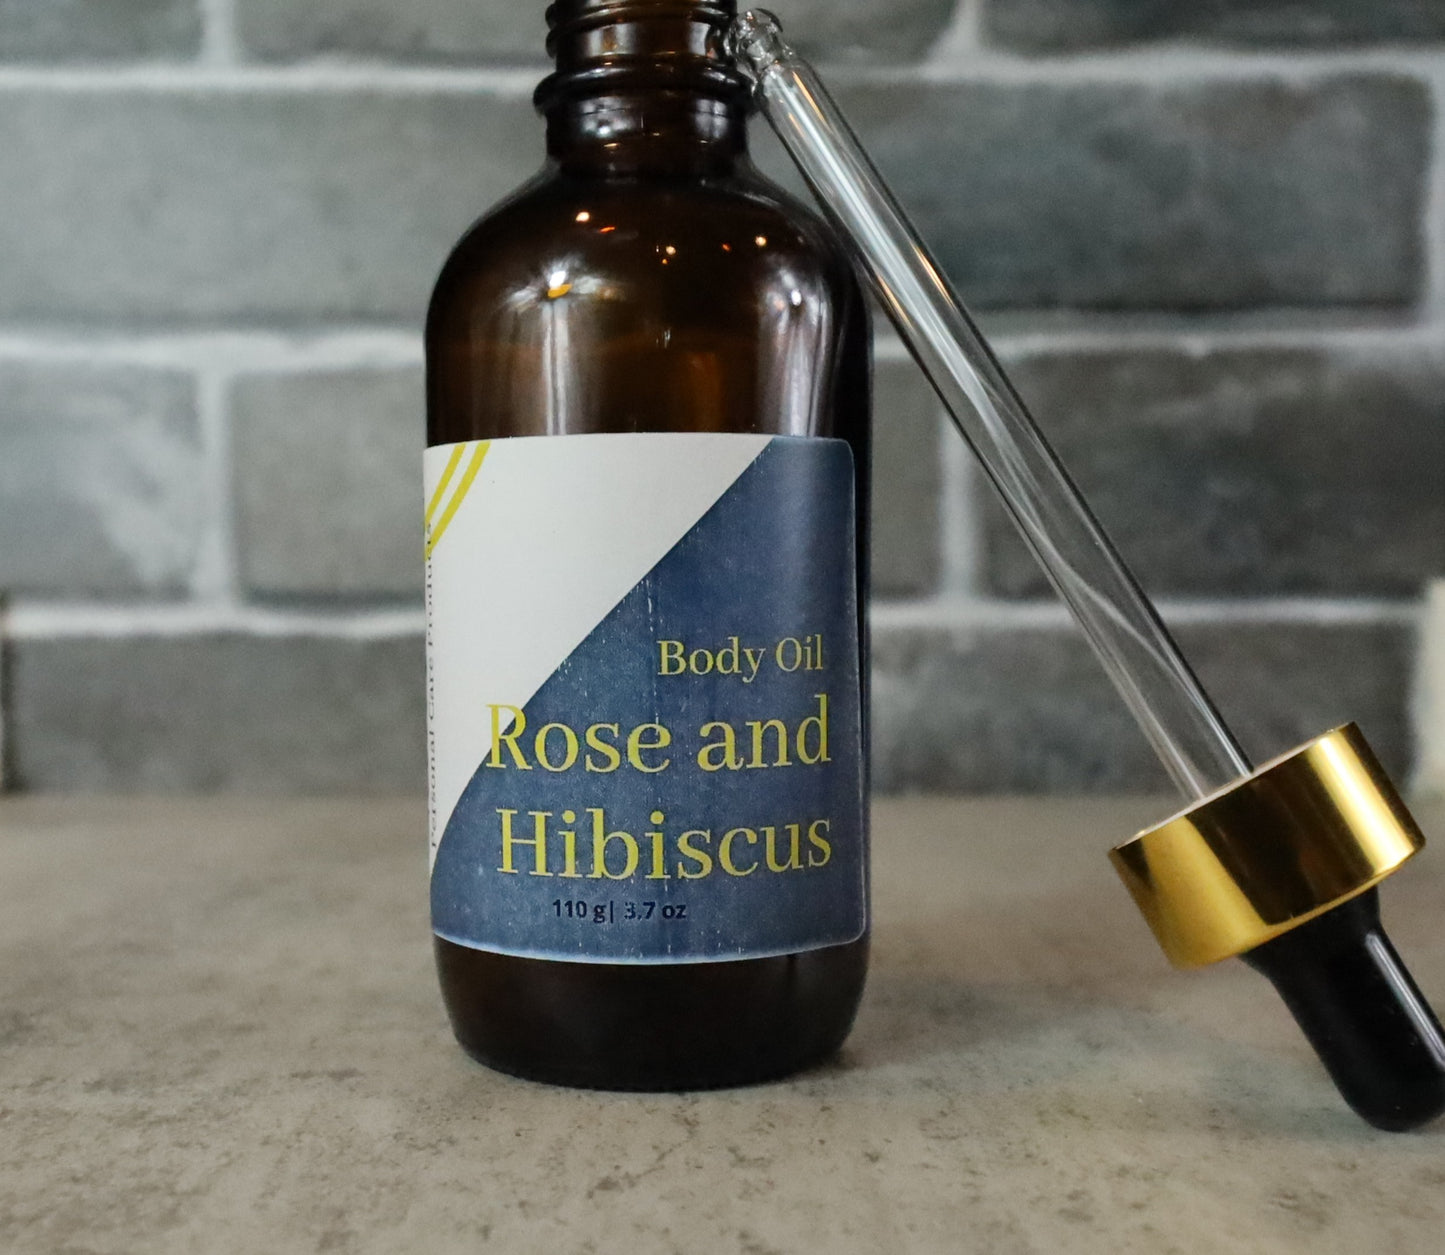 Rose and Hibiscus organic body oil for soft skin, for moisturized skin.